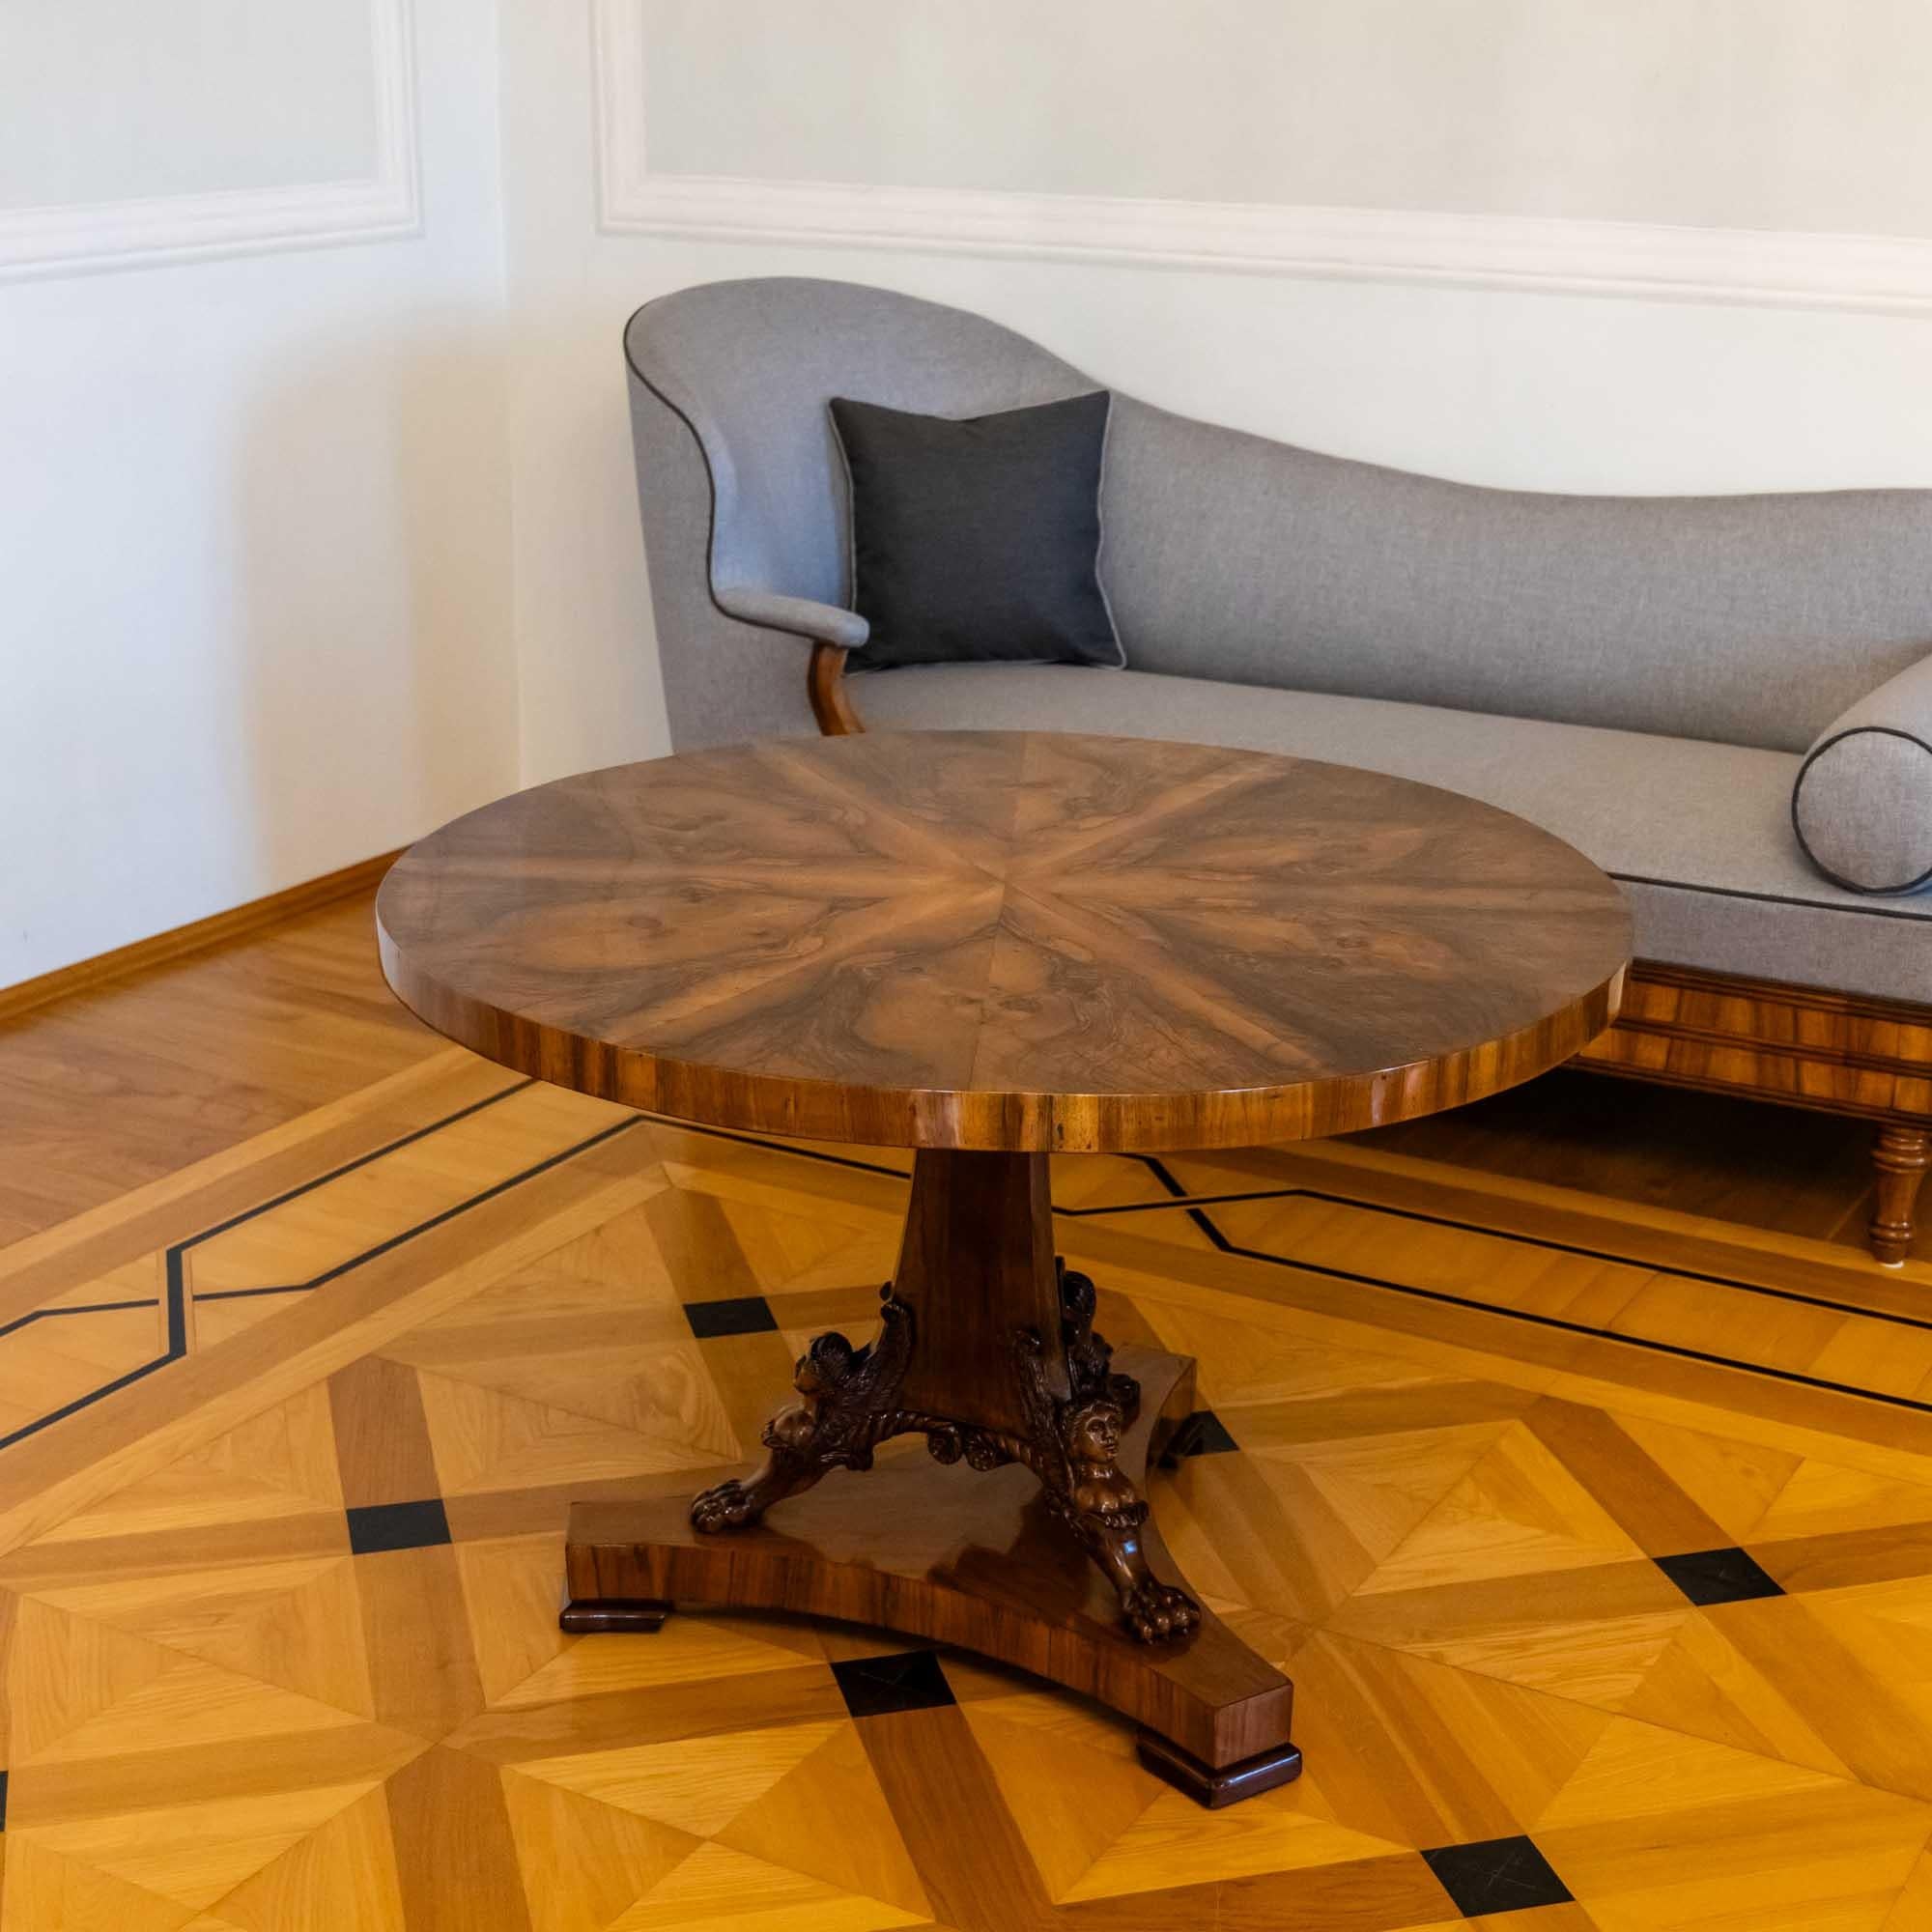 Exquisite Viennese walnut center table showcasing a round, radially veneered tabletop. The three-sided central column is adorned with carved, winged caryatids featuring lion paws. The concave base complements the central column harmoniously. This